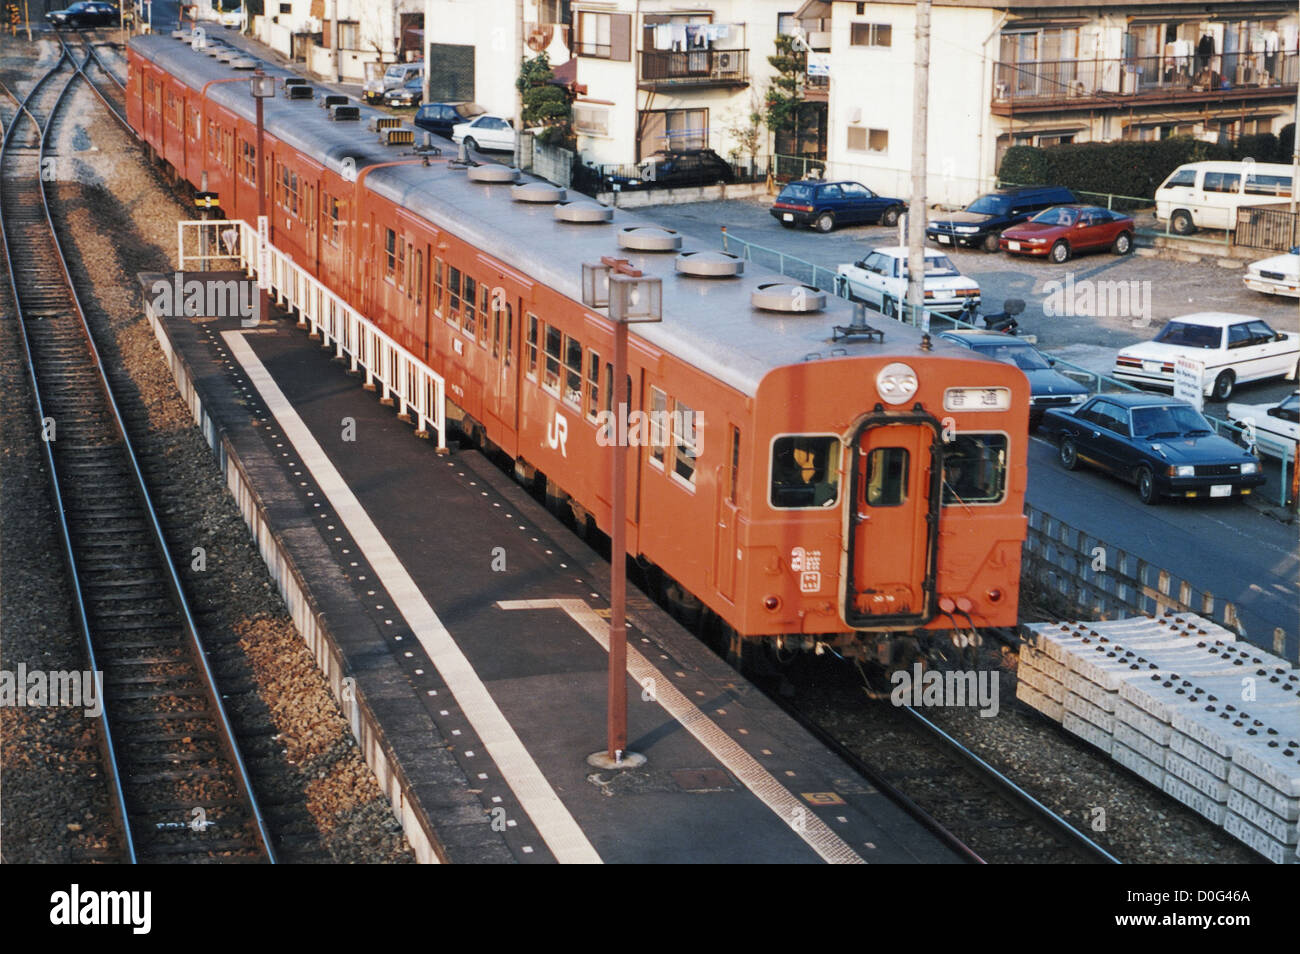 Diesel train formerly used by JR East on Hachiko Line. Stock Photo